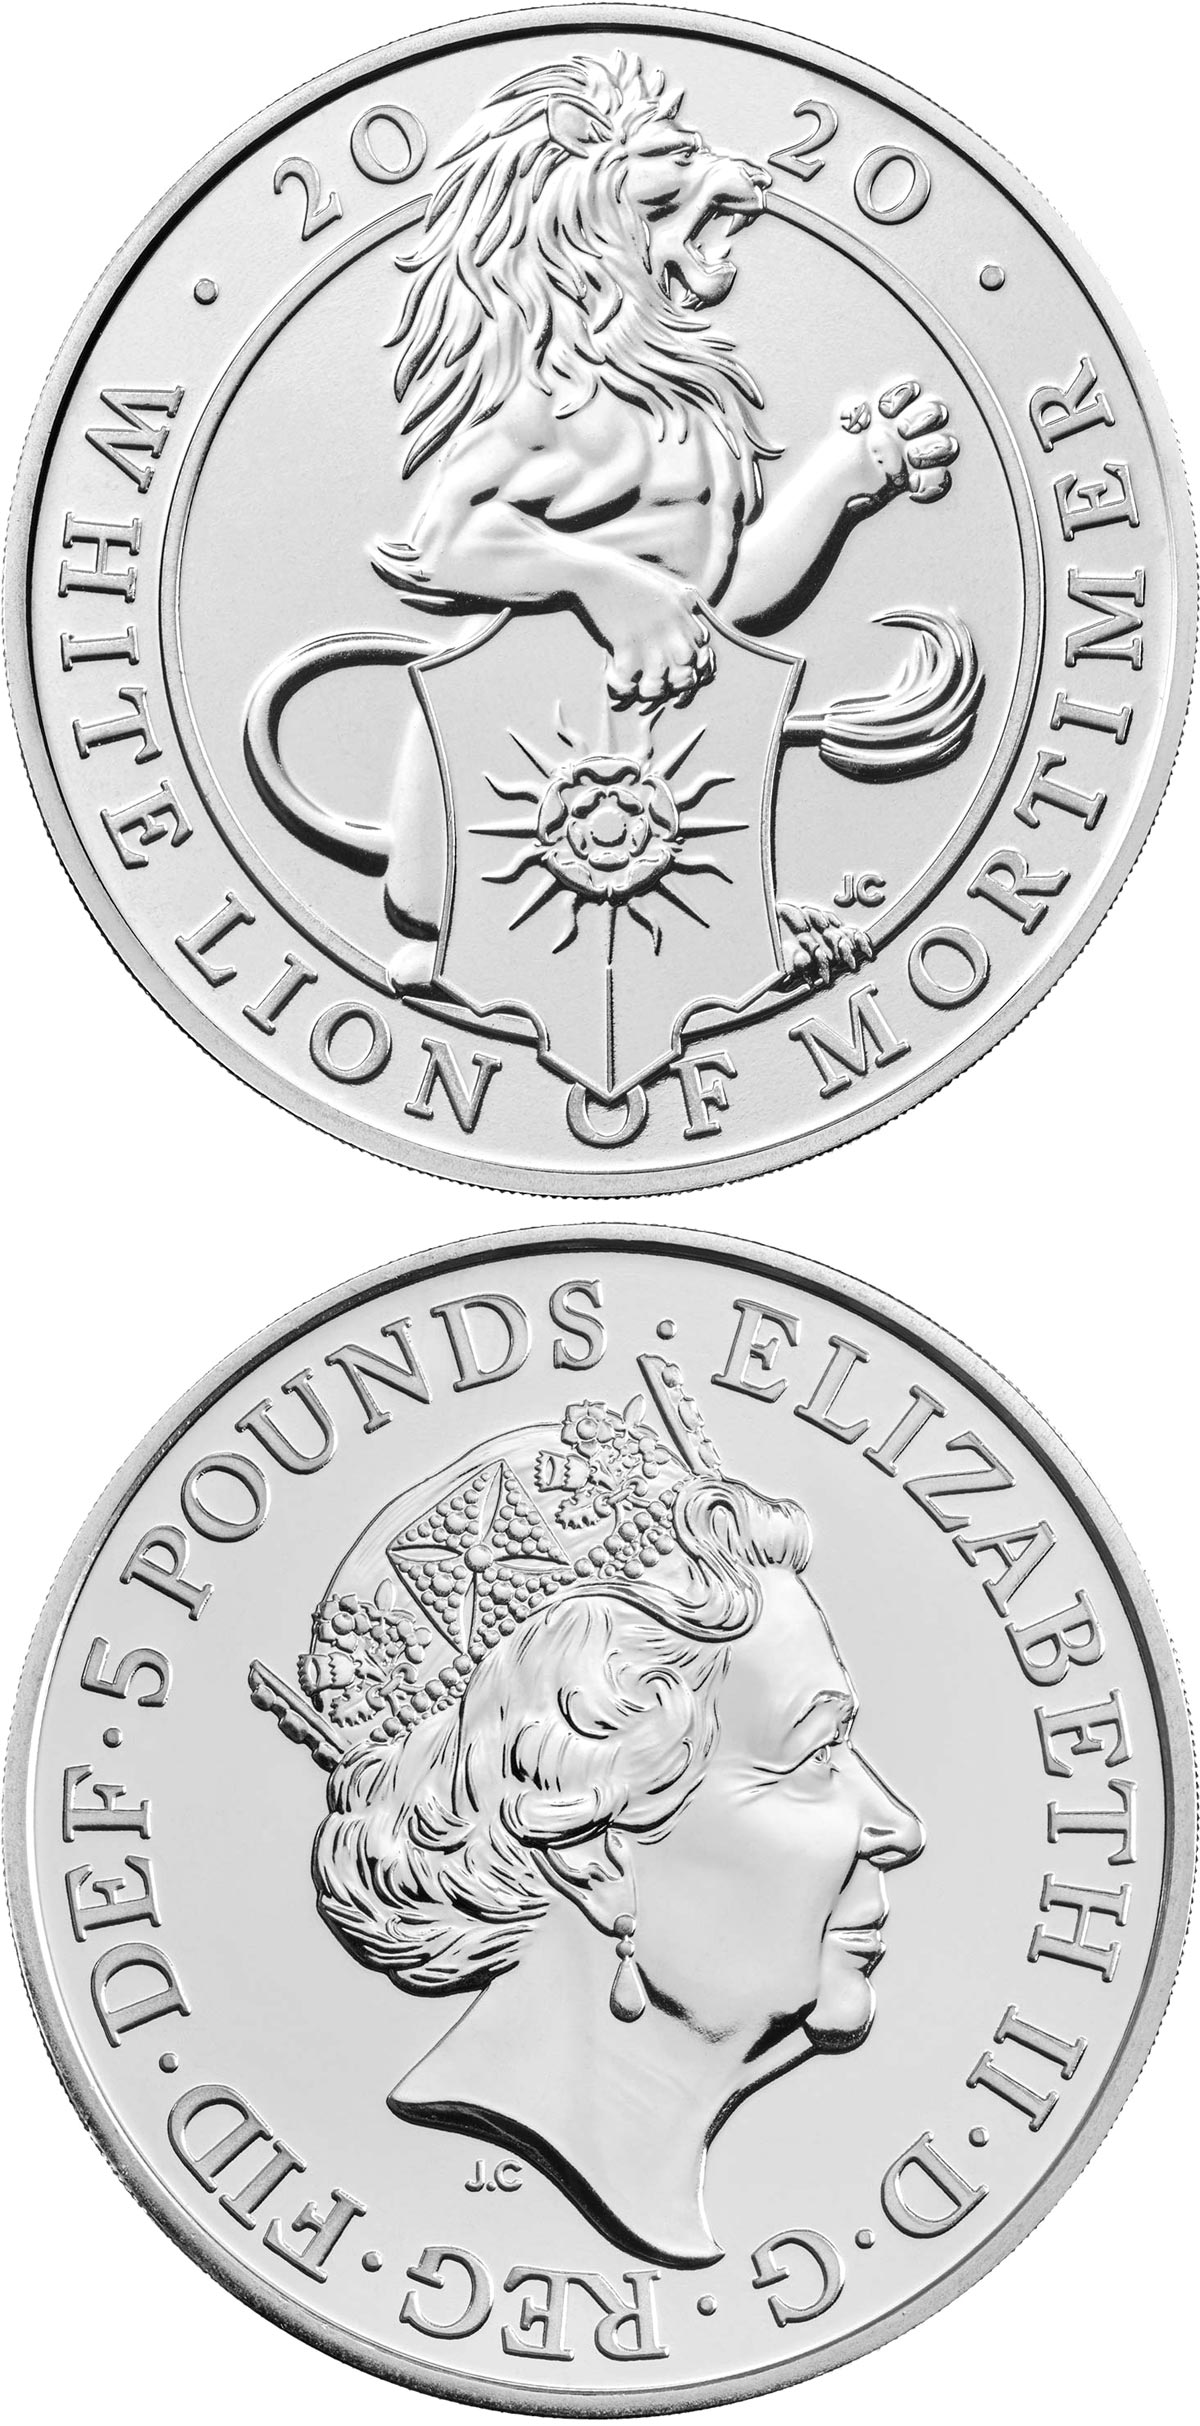 Image of 5 pounds coin - The White Lion of Mortimer | United Kingdom 2020.  The Silver coin is of BU quality.